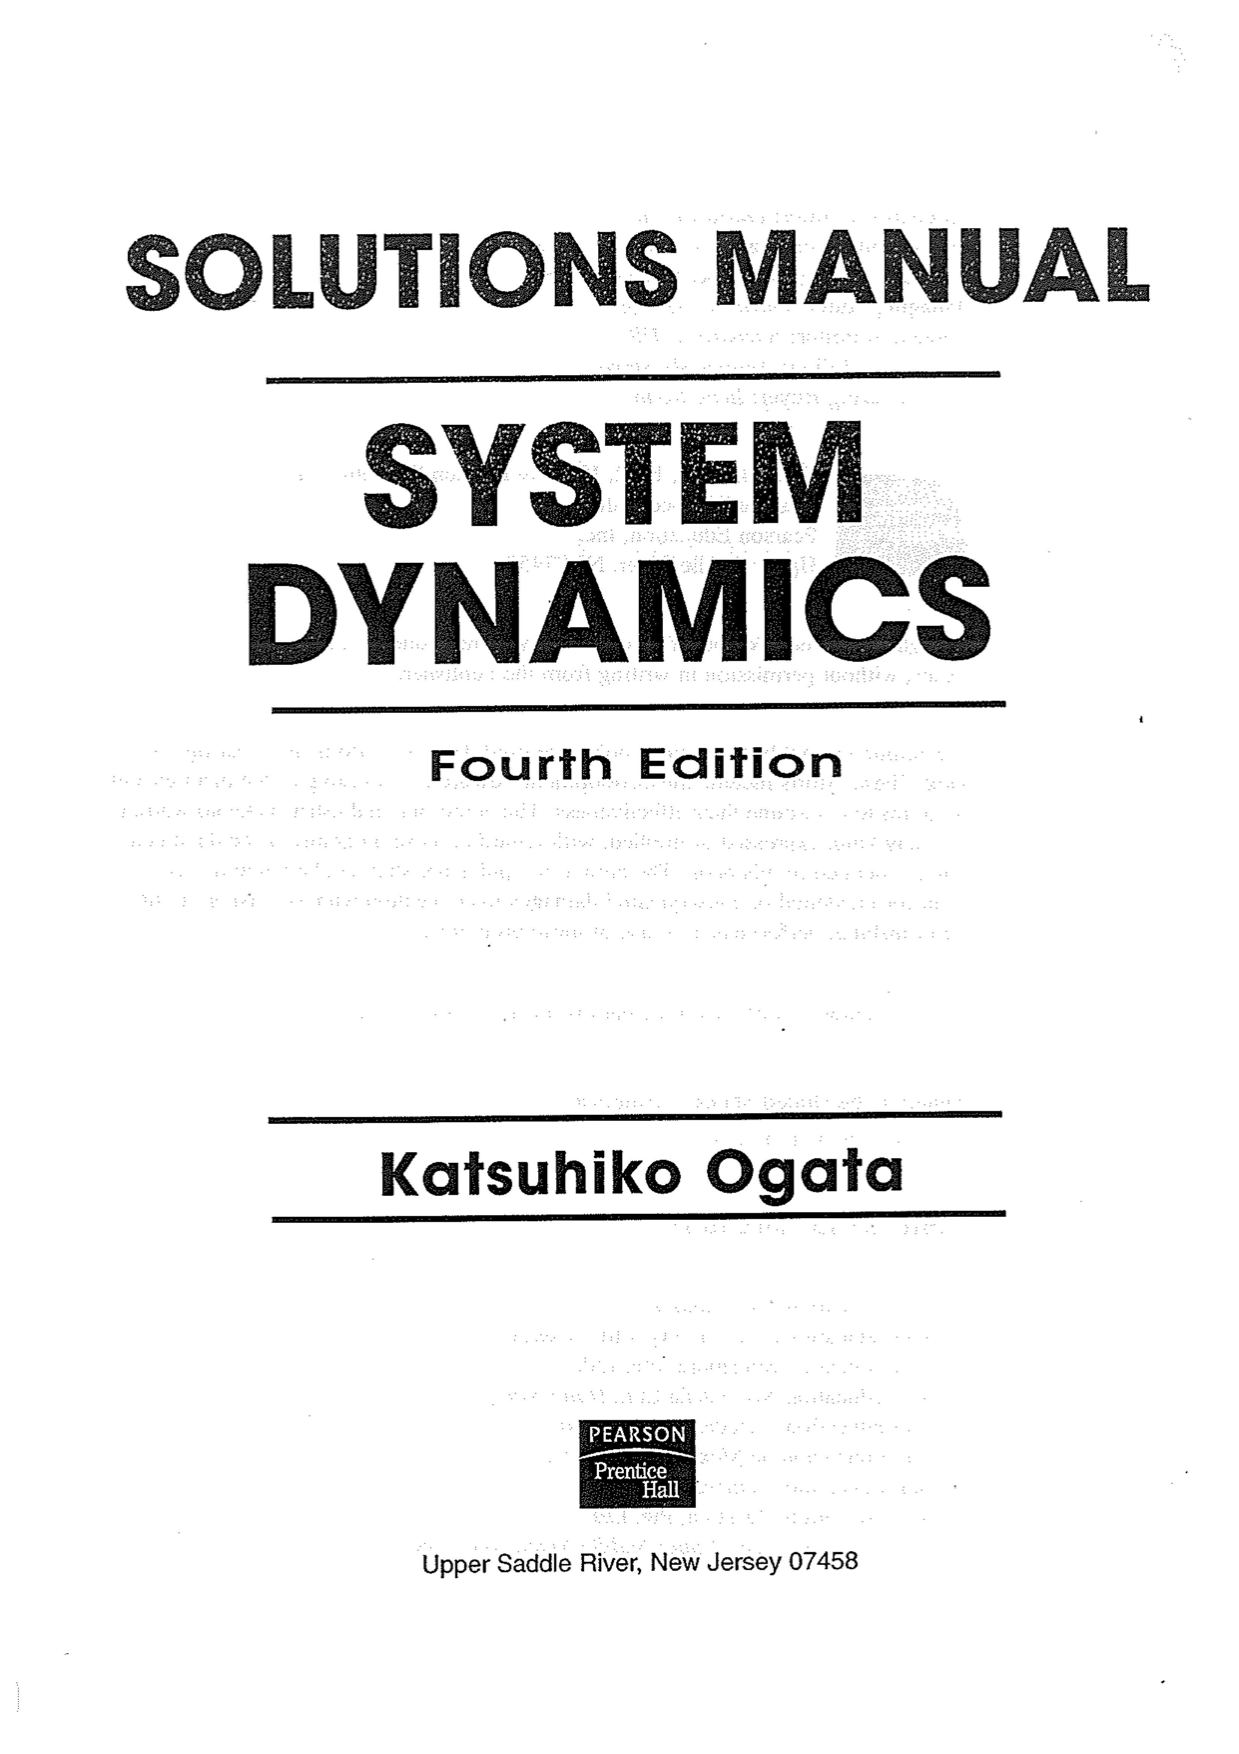 Download free System dynamics Katsuhiko Ogata 4th edition solution manual book in pdf format | gioumeh solutions